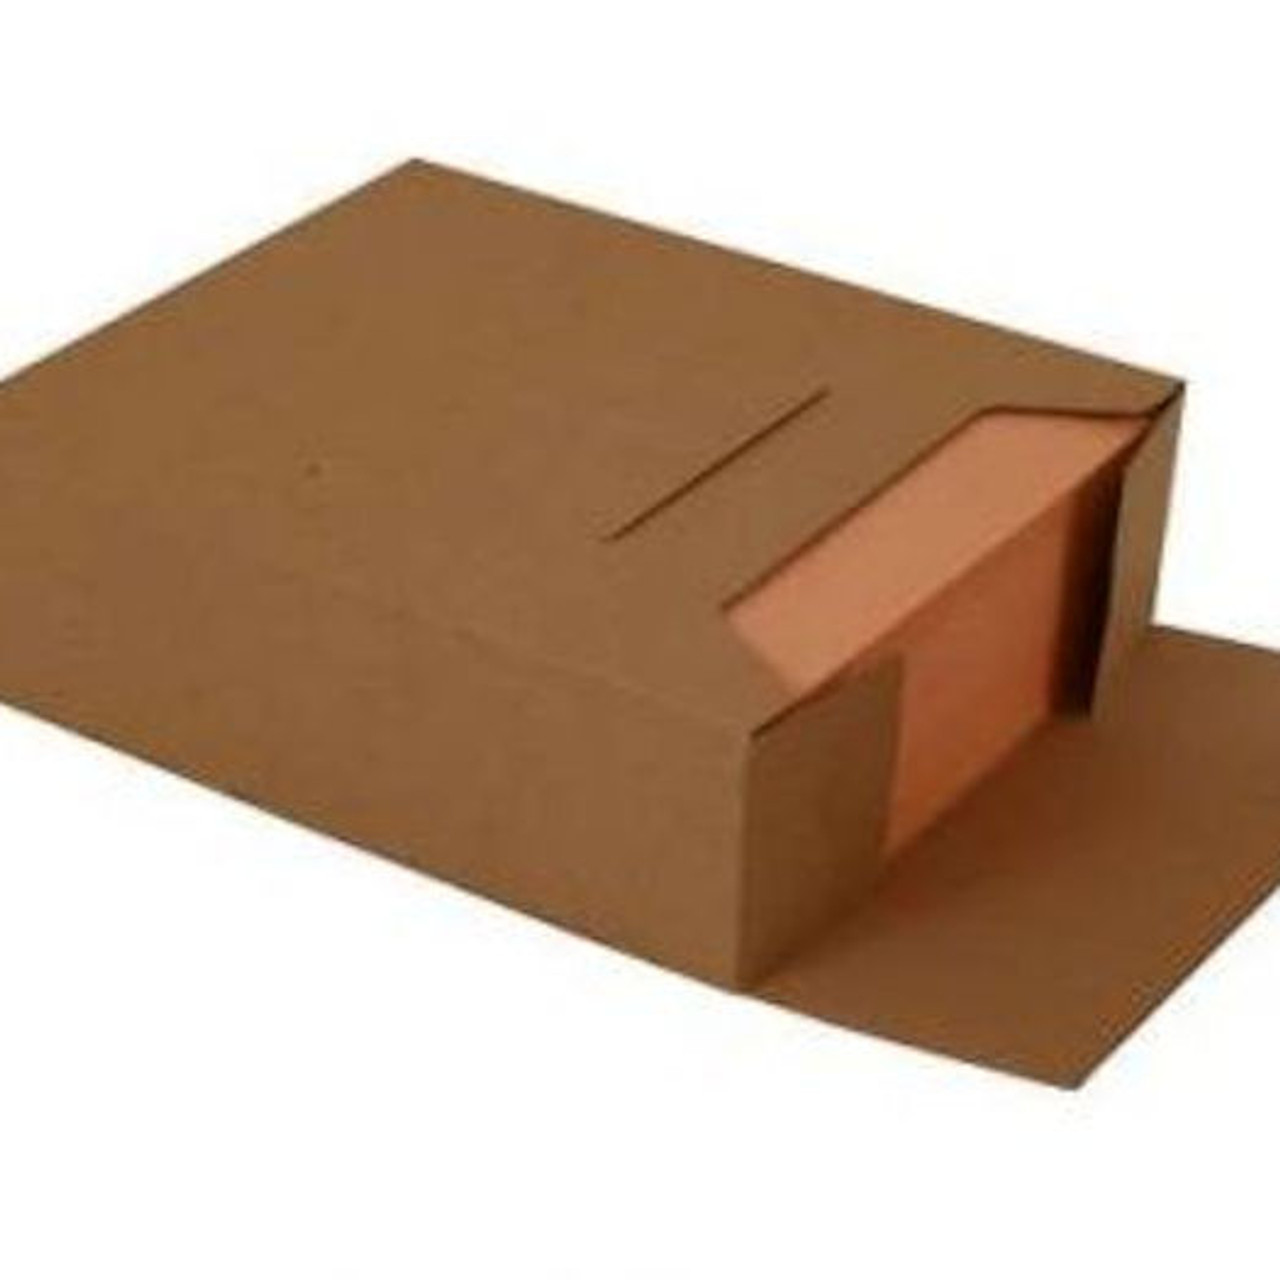 Peach Paper 10"x 12"  ( 250 X 300mm ) Packed 1,000 sheets